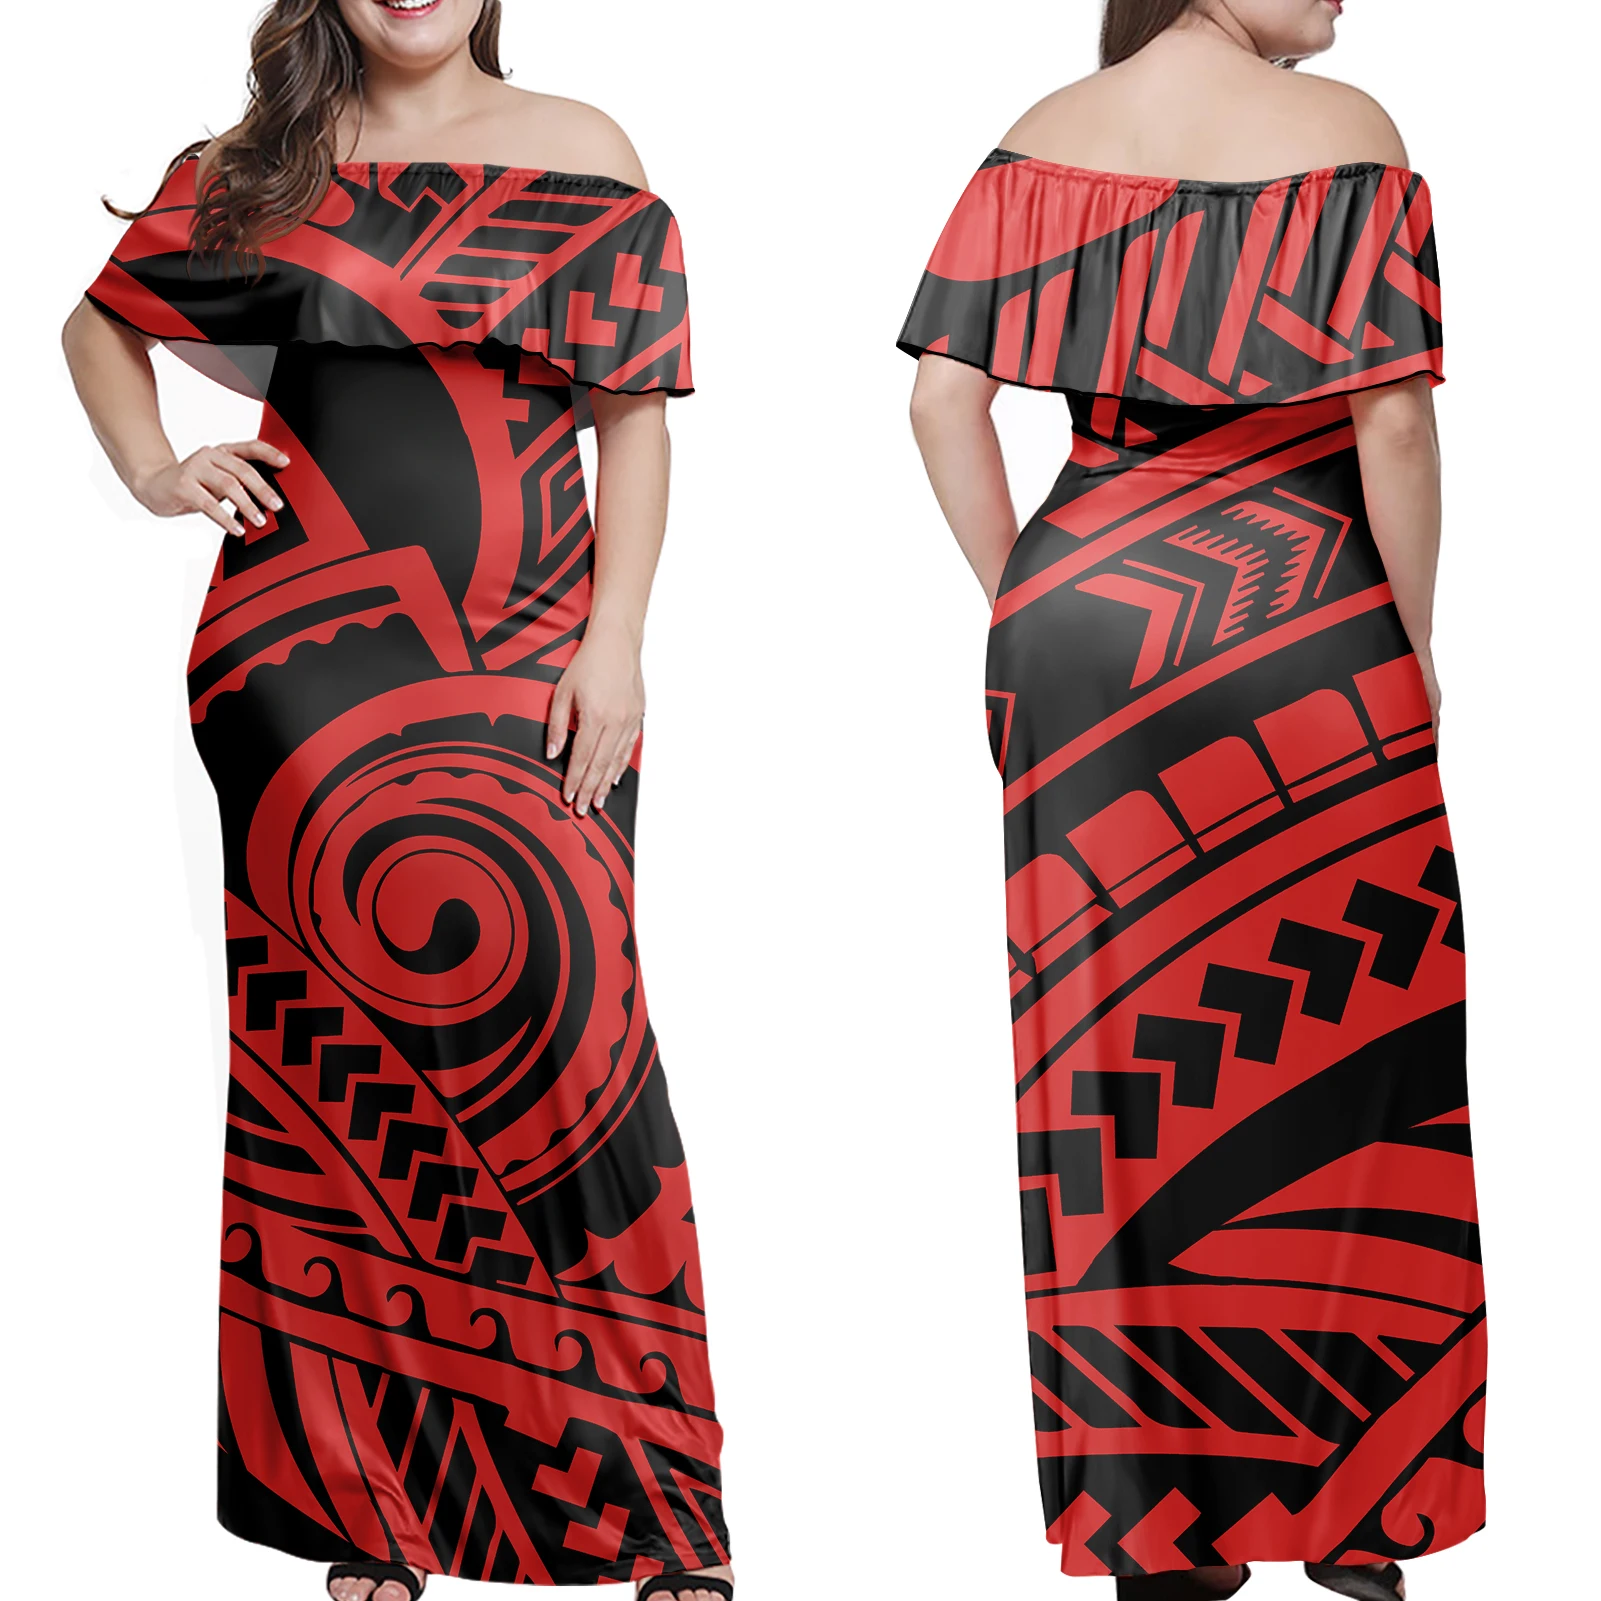 

Maxi Dress Summer Polynesian Floral Red Stripe Print Evening Party Casual Plus Size Maxi Dress Off The Shoulder Women Maxi Dress, Customized color